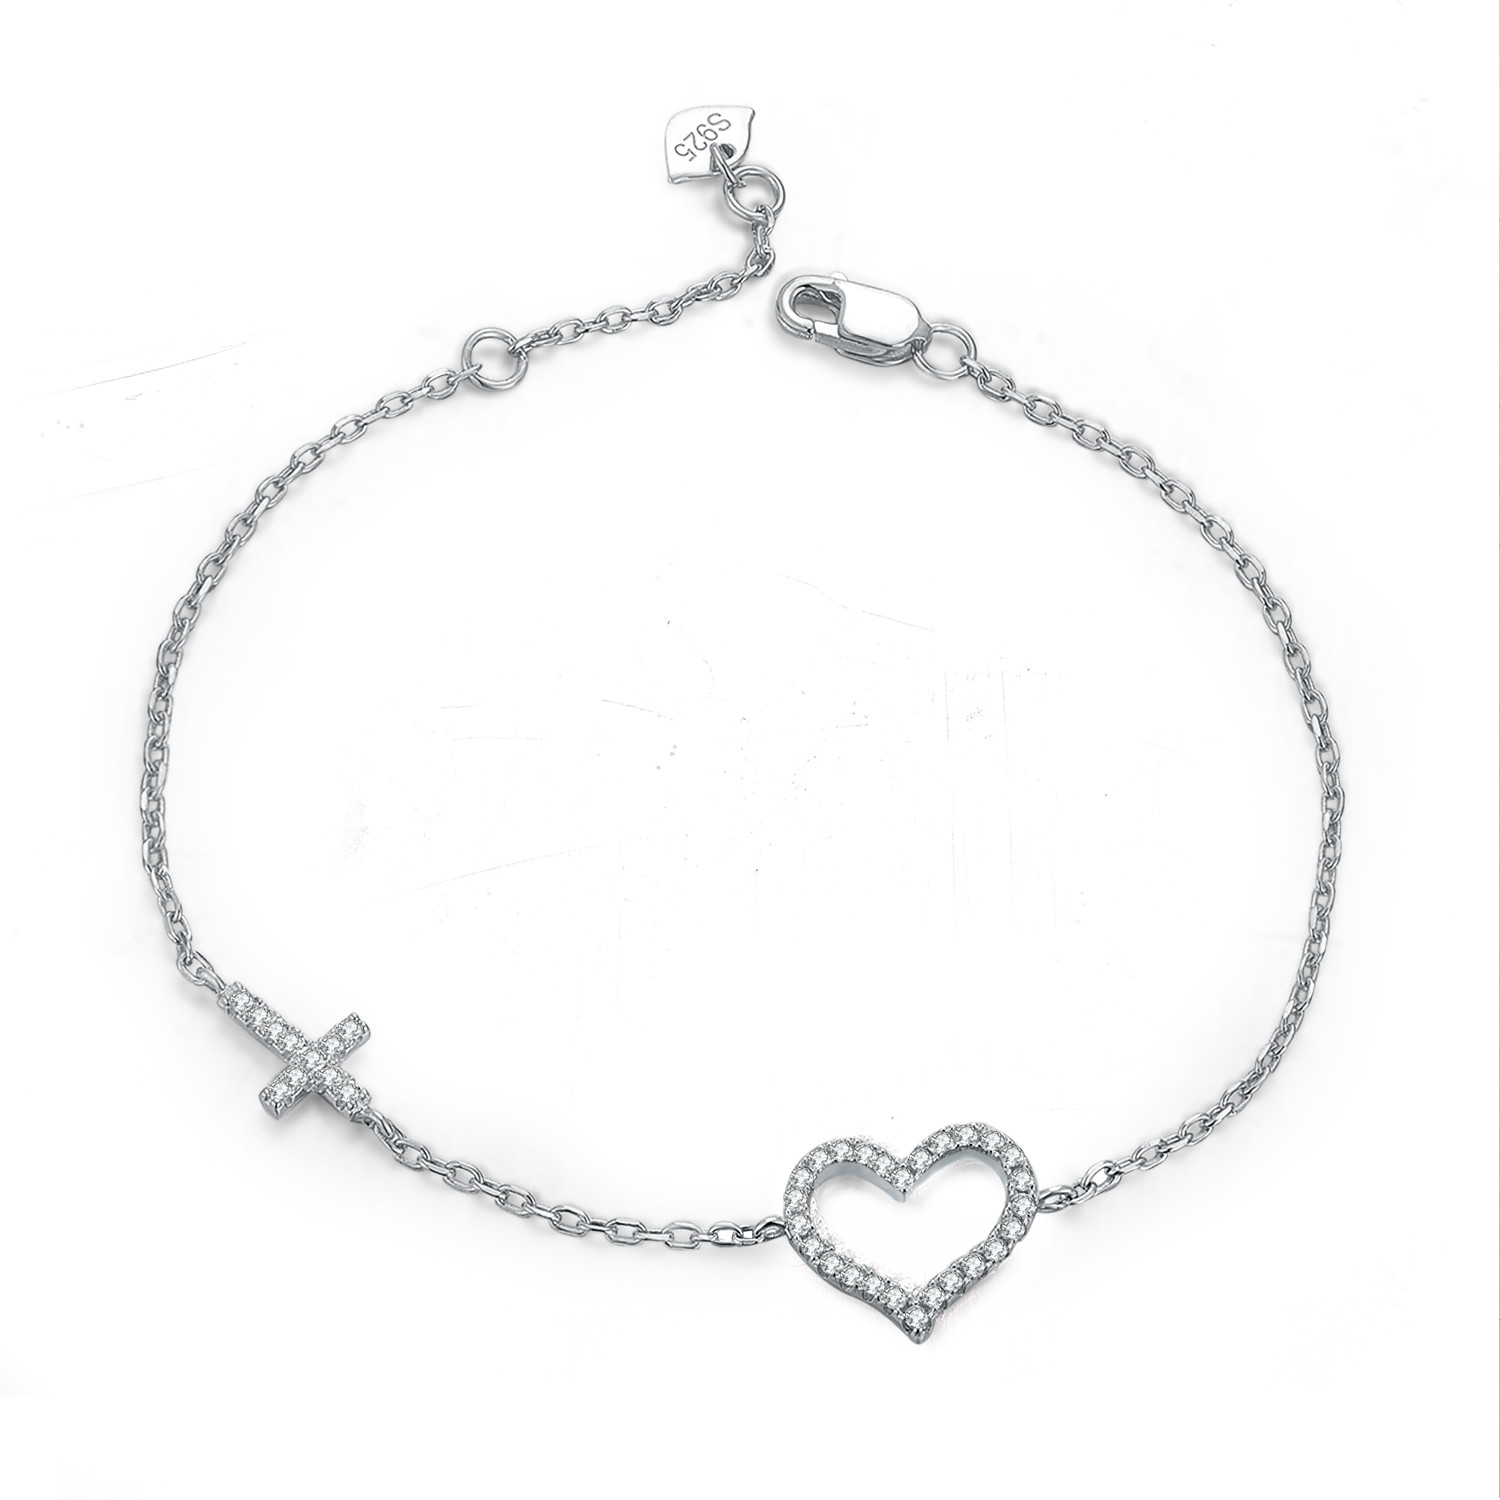 Fashion Cross Heart Shaped 925 Sterling Silver Bracelet Bangle Anniversary High Quality Jewelry Gift(图1)